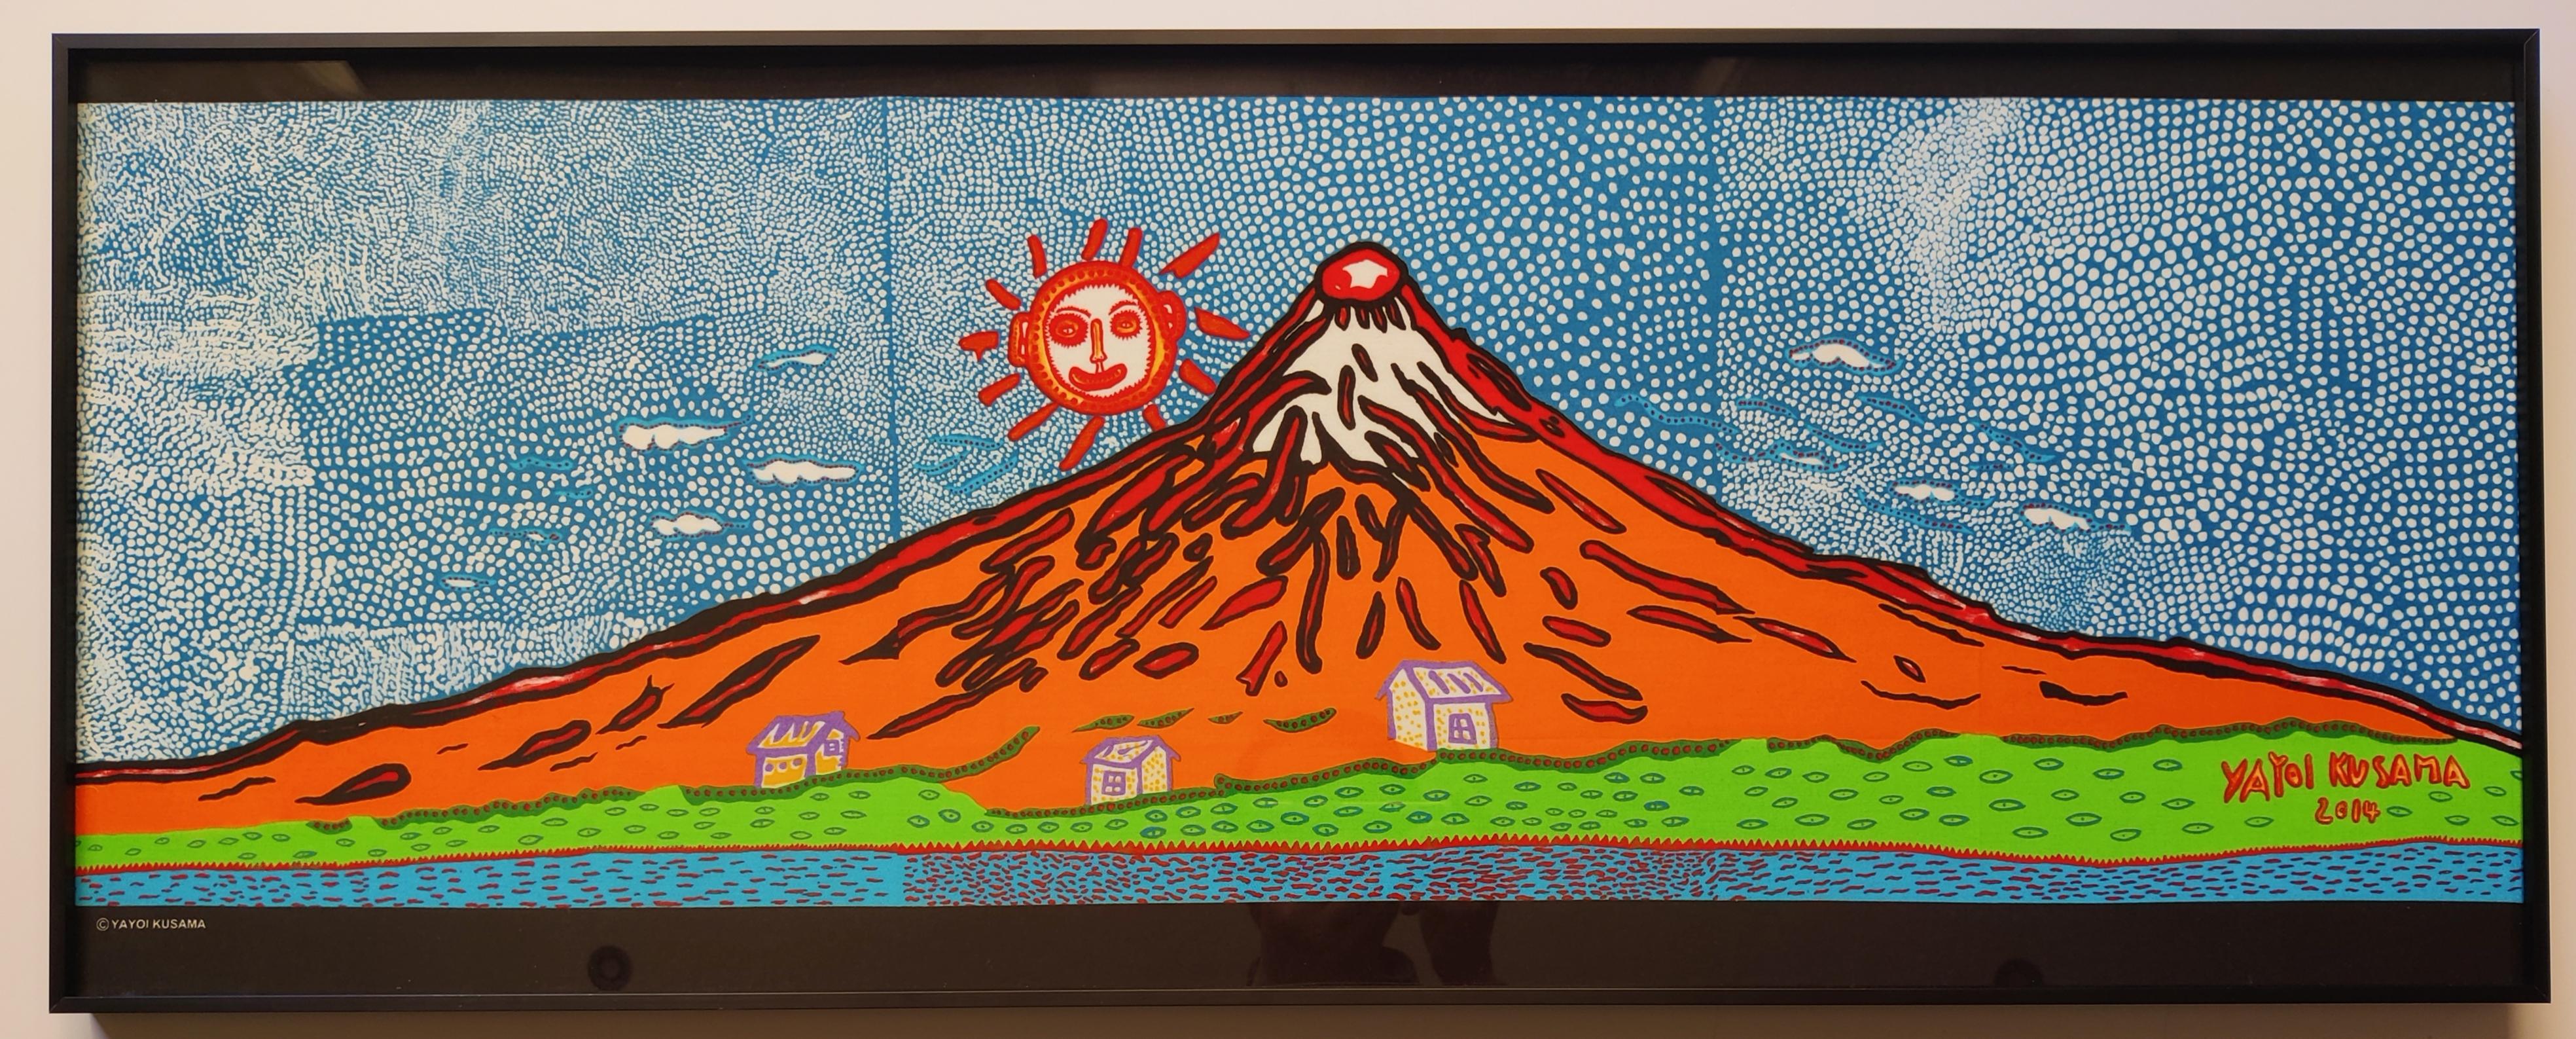 Yayoi Kusama
When Life Boundlessly Flares Up to the Universe, 2014
Print on the cotton towel
Size 92 x 34 x 2.5 cm
Framed with the black aluminium frame and the UV-protected acrylic glass  
published by 永樂屋, Japan